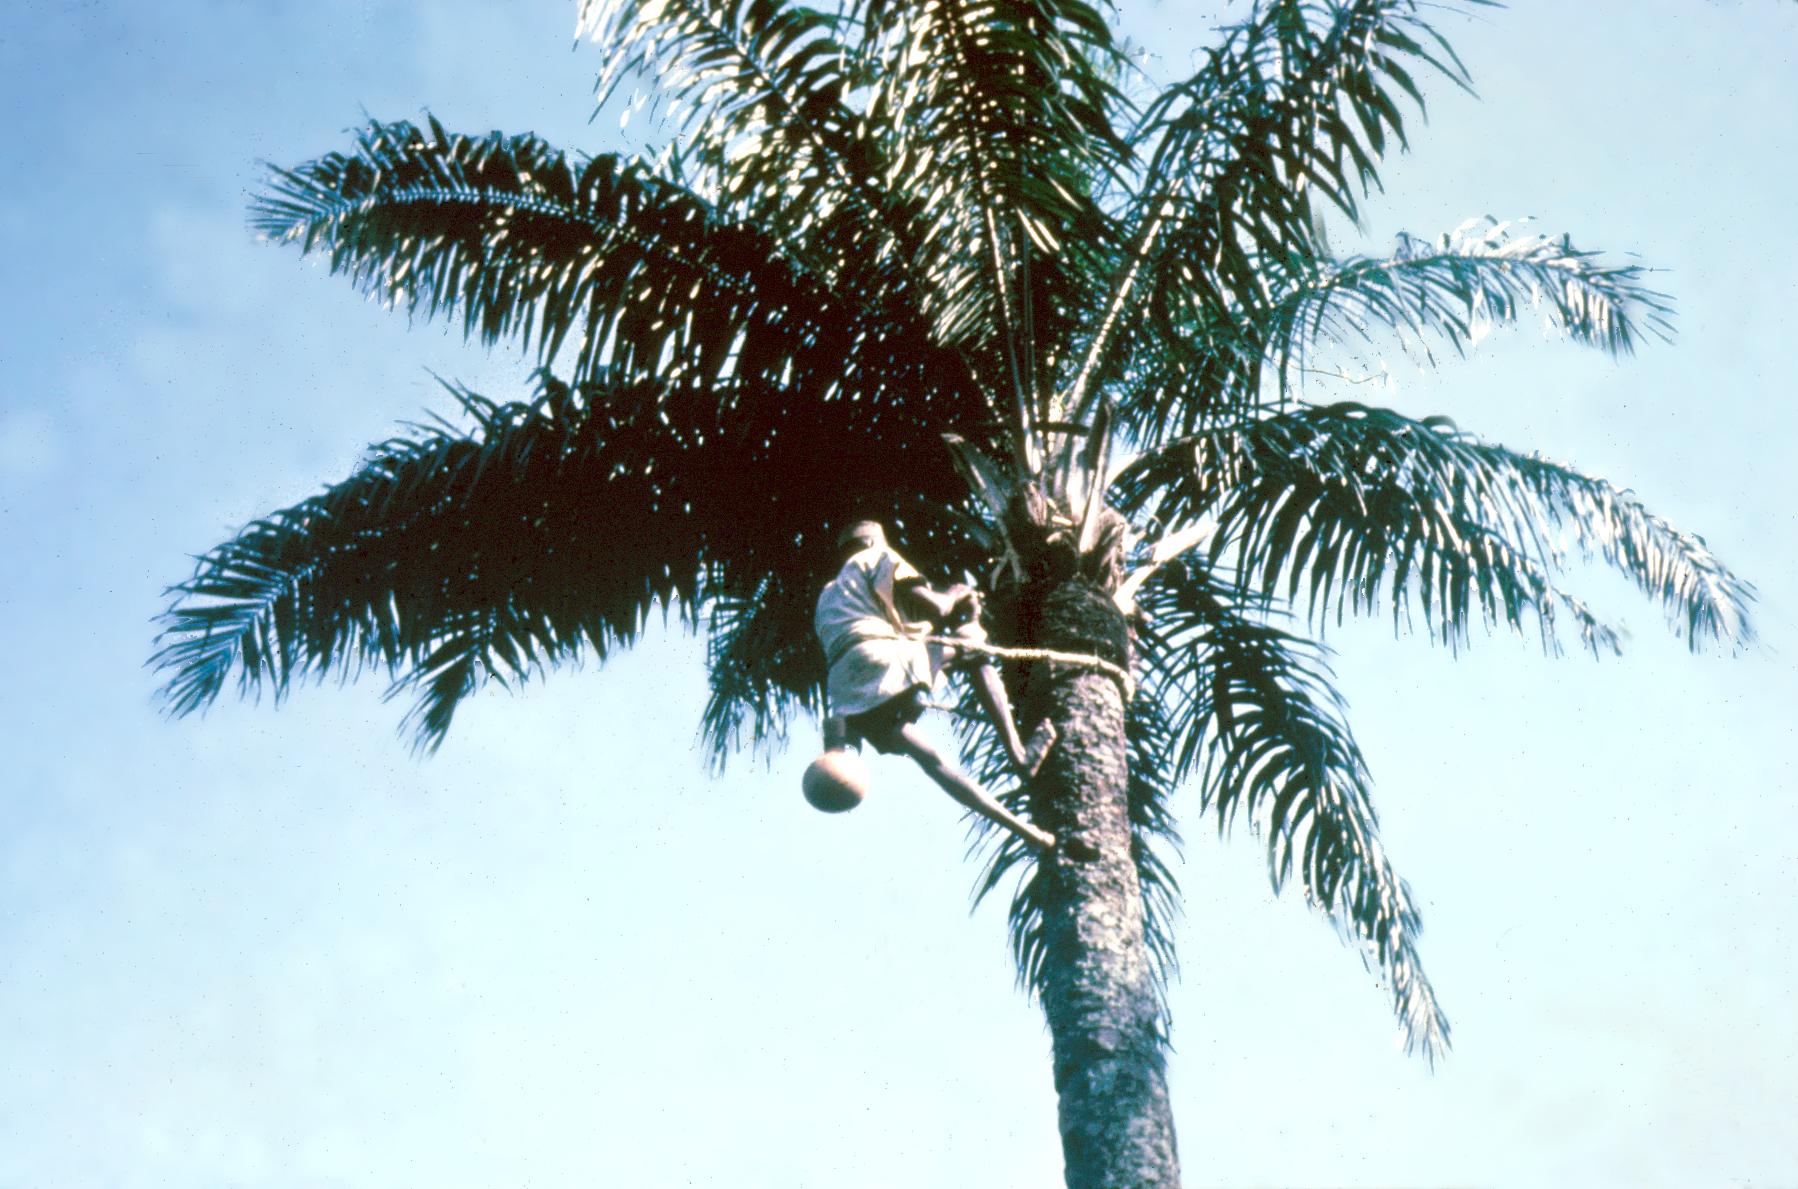 A Palm Wine Tapper at Work